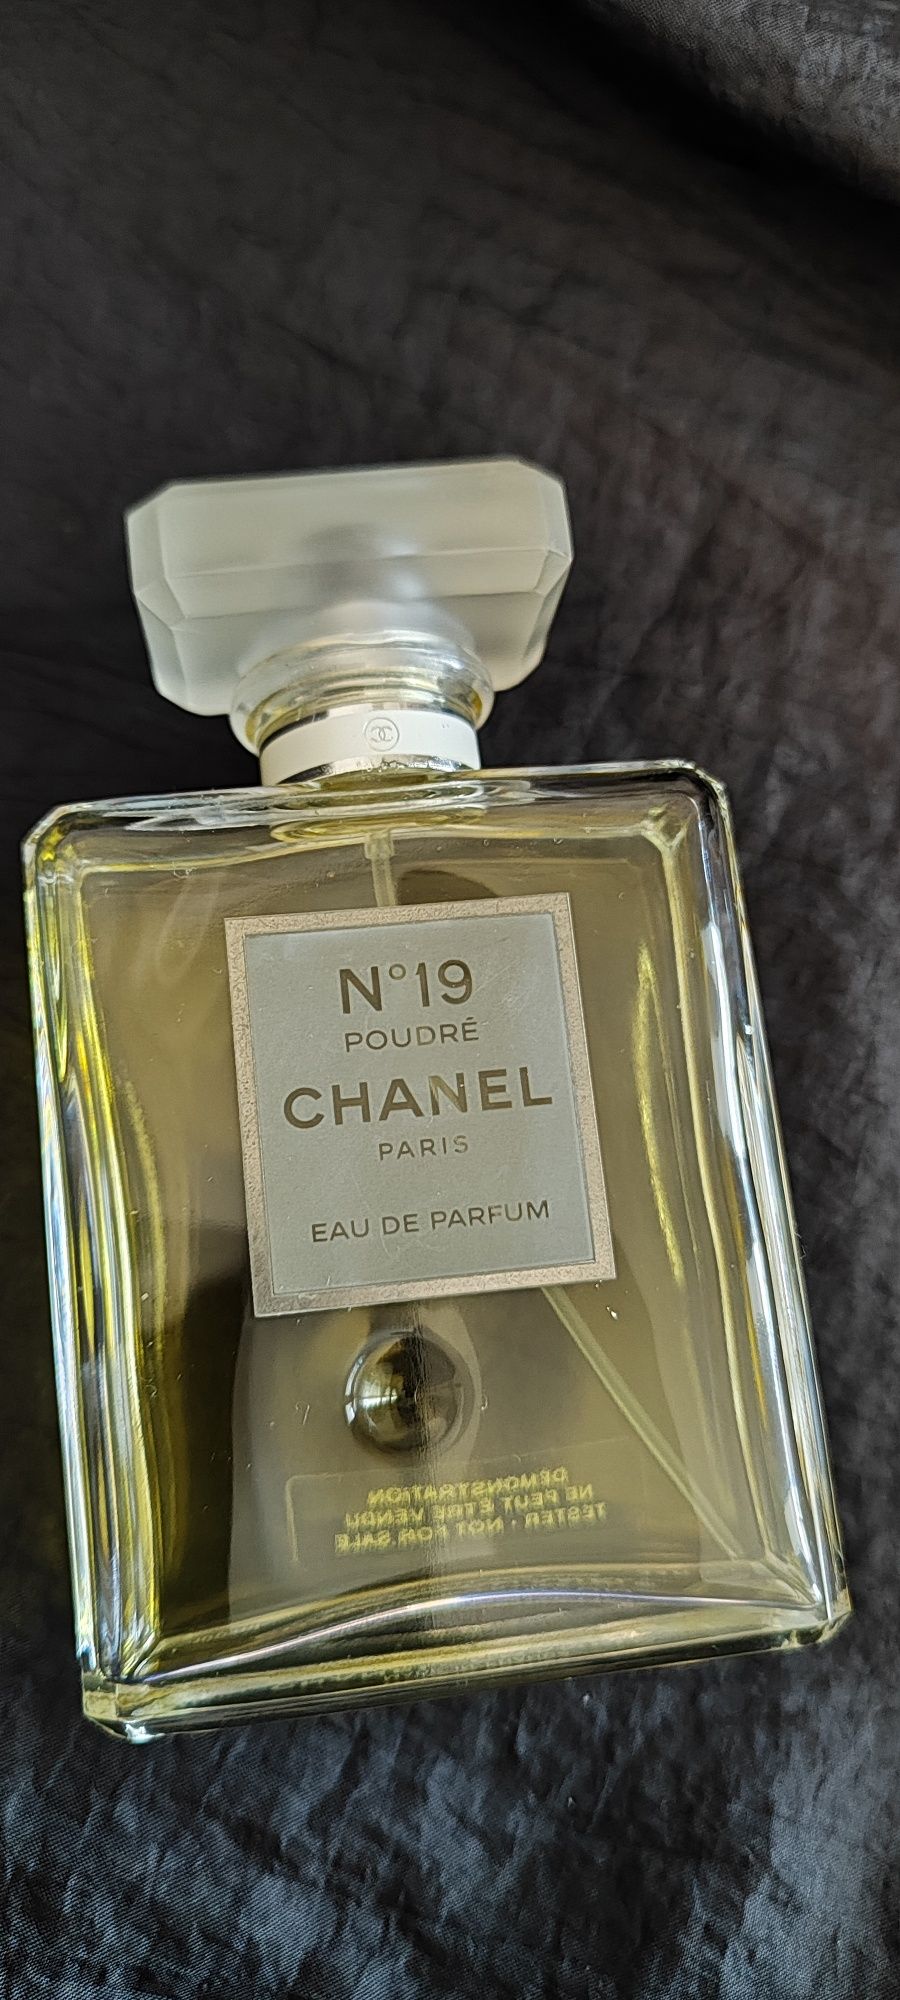 Chanel N'19 Poudre парфюмерная вода